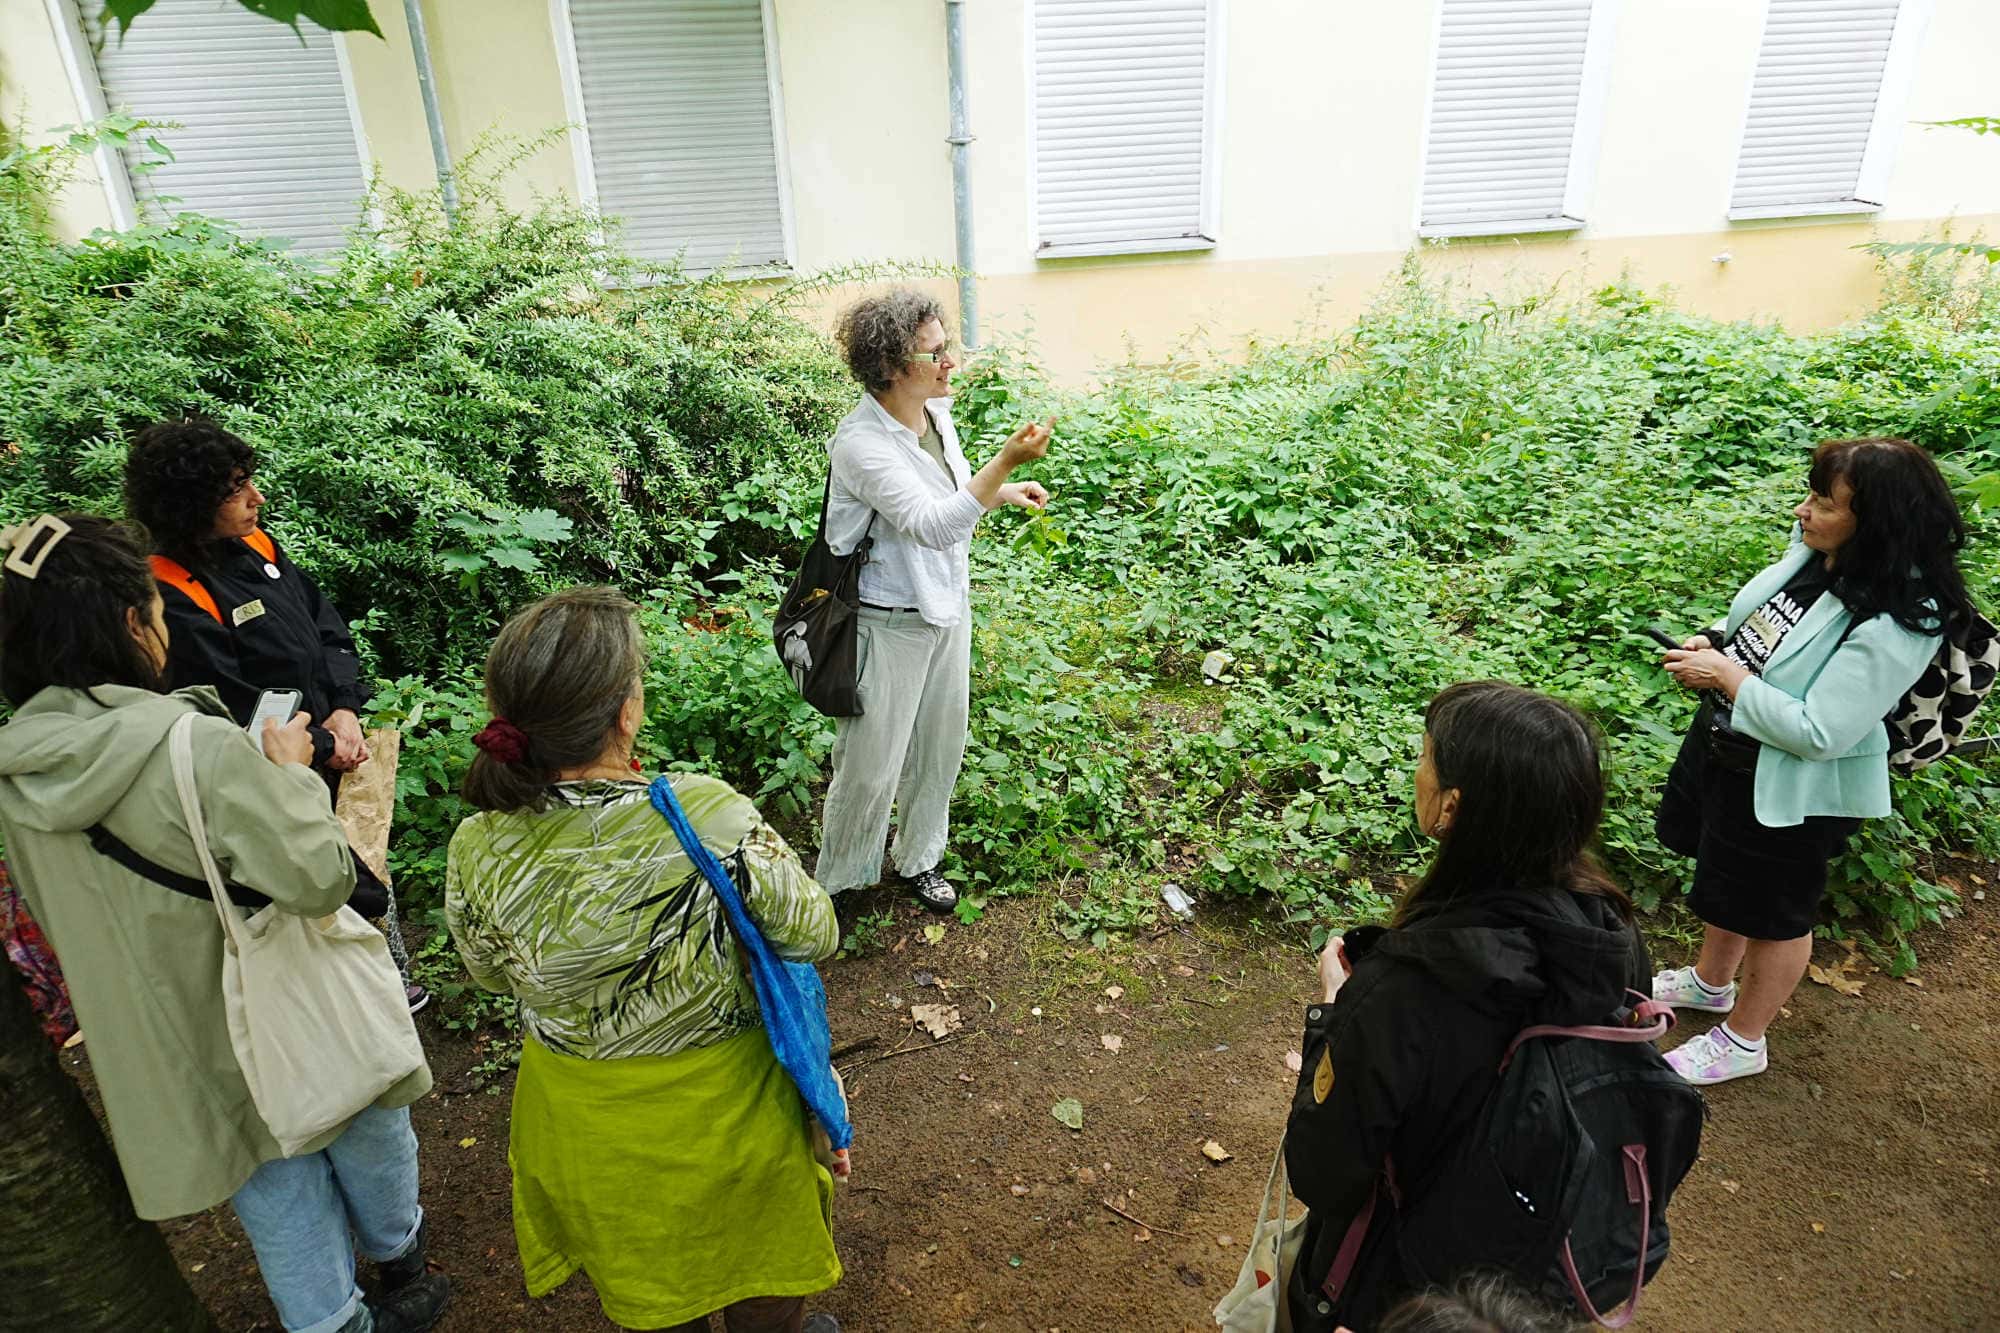 A person talking among shrubs beside a house